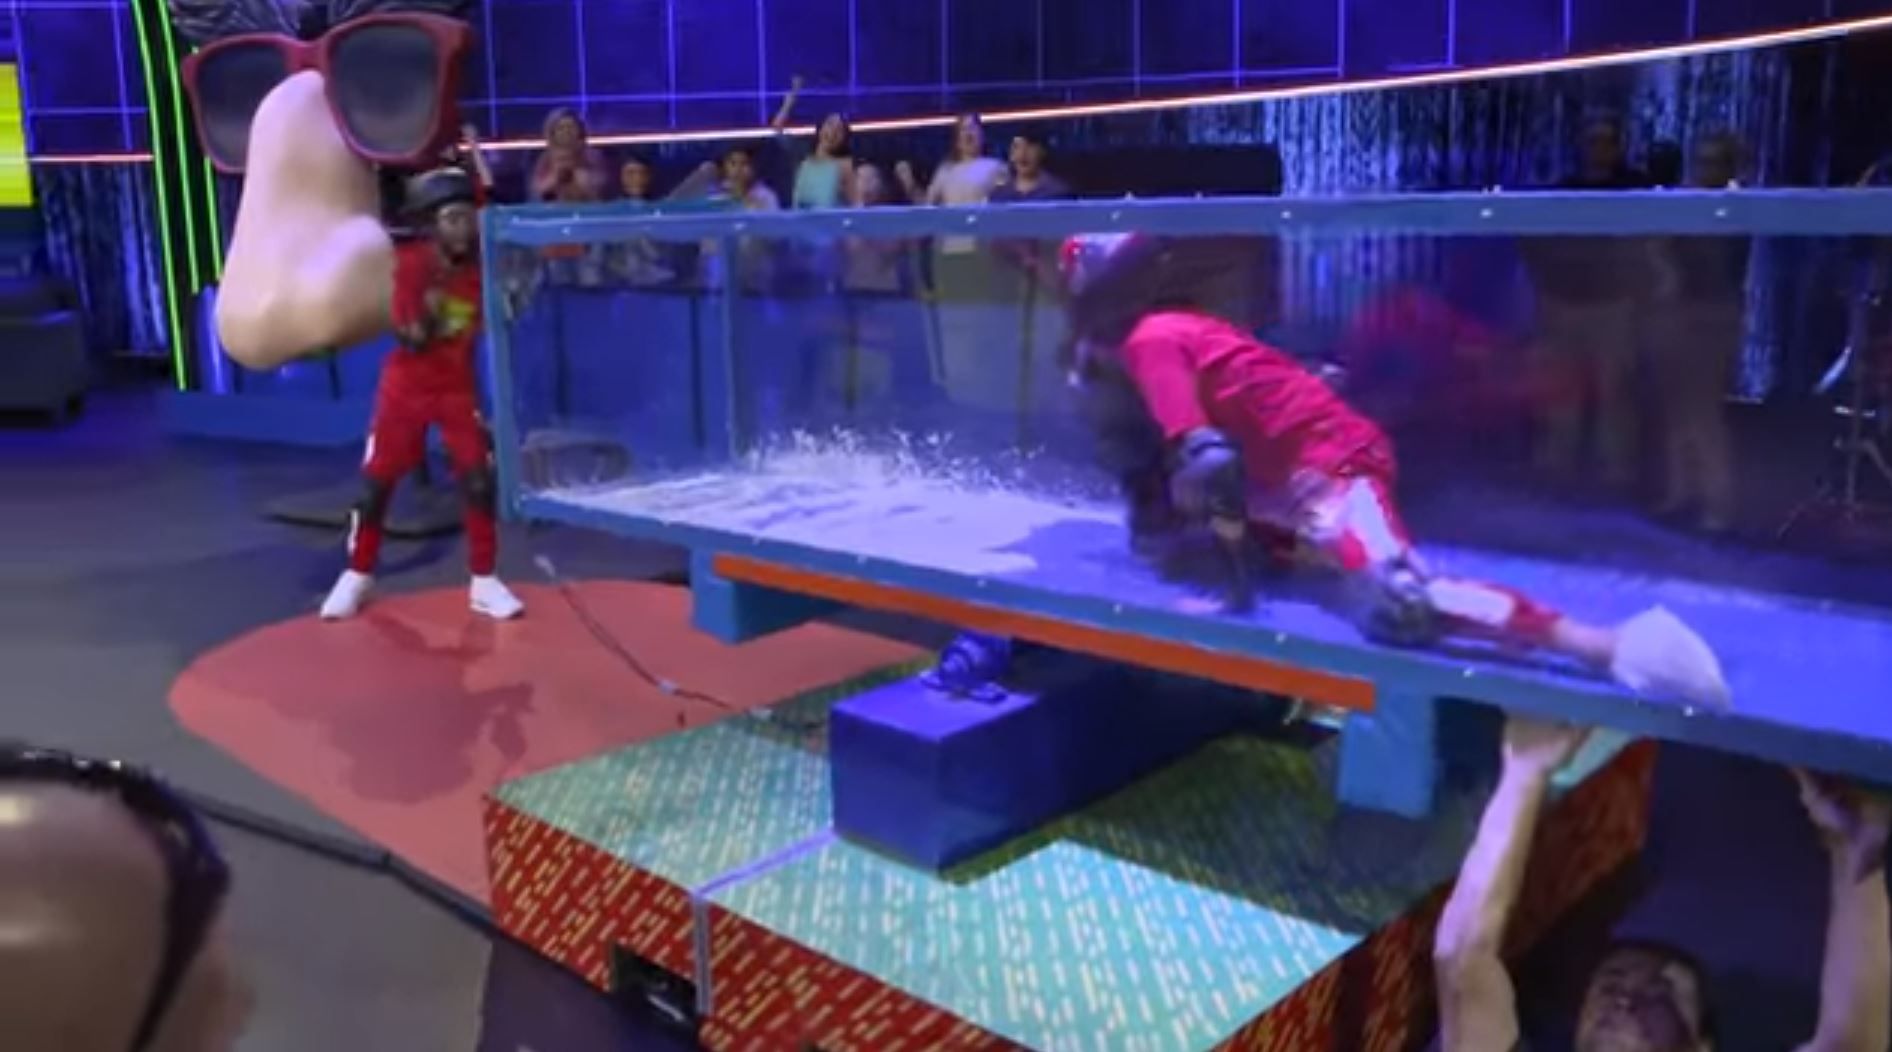 The 'Double Dare' Reboot Has Arrived, And It's Everything We Wanted It To Be